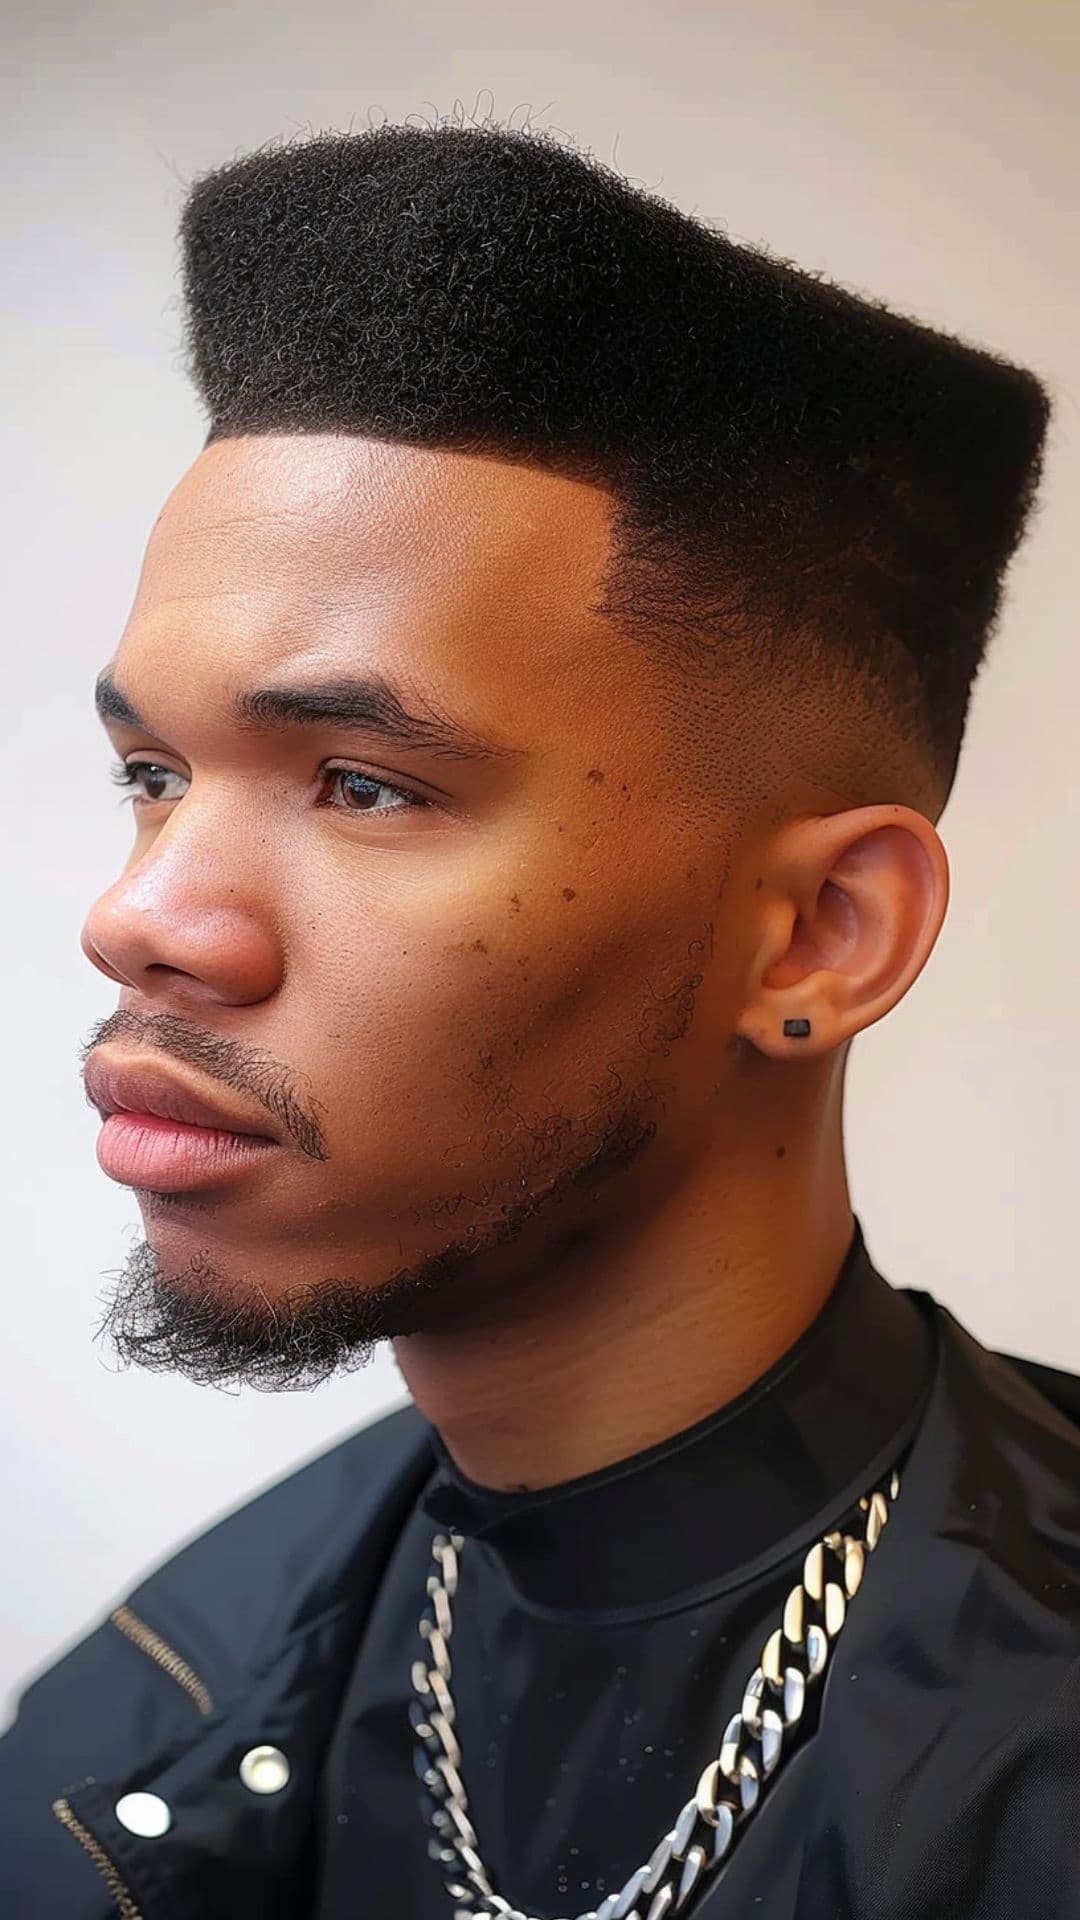 A black man modelling a flat top hairstyle.